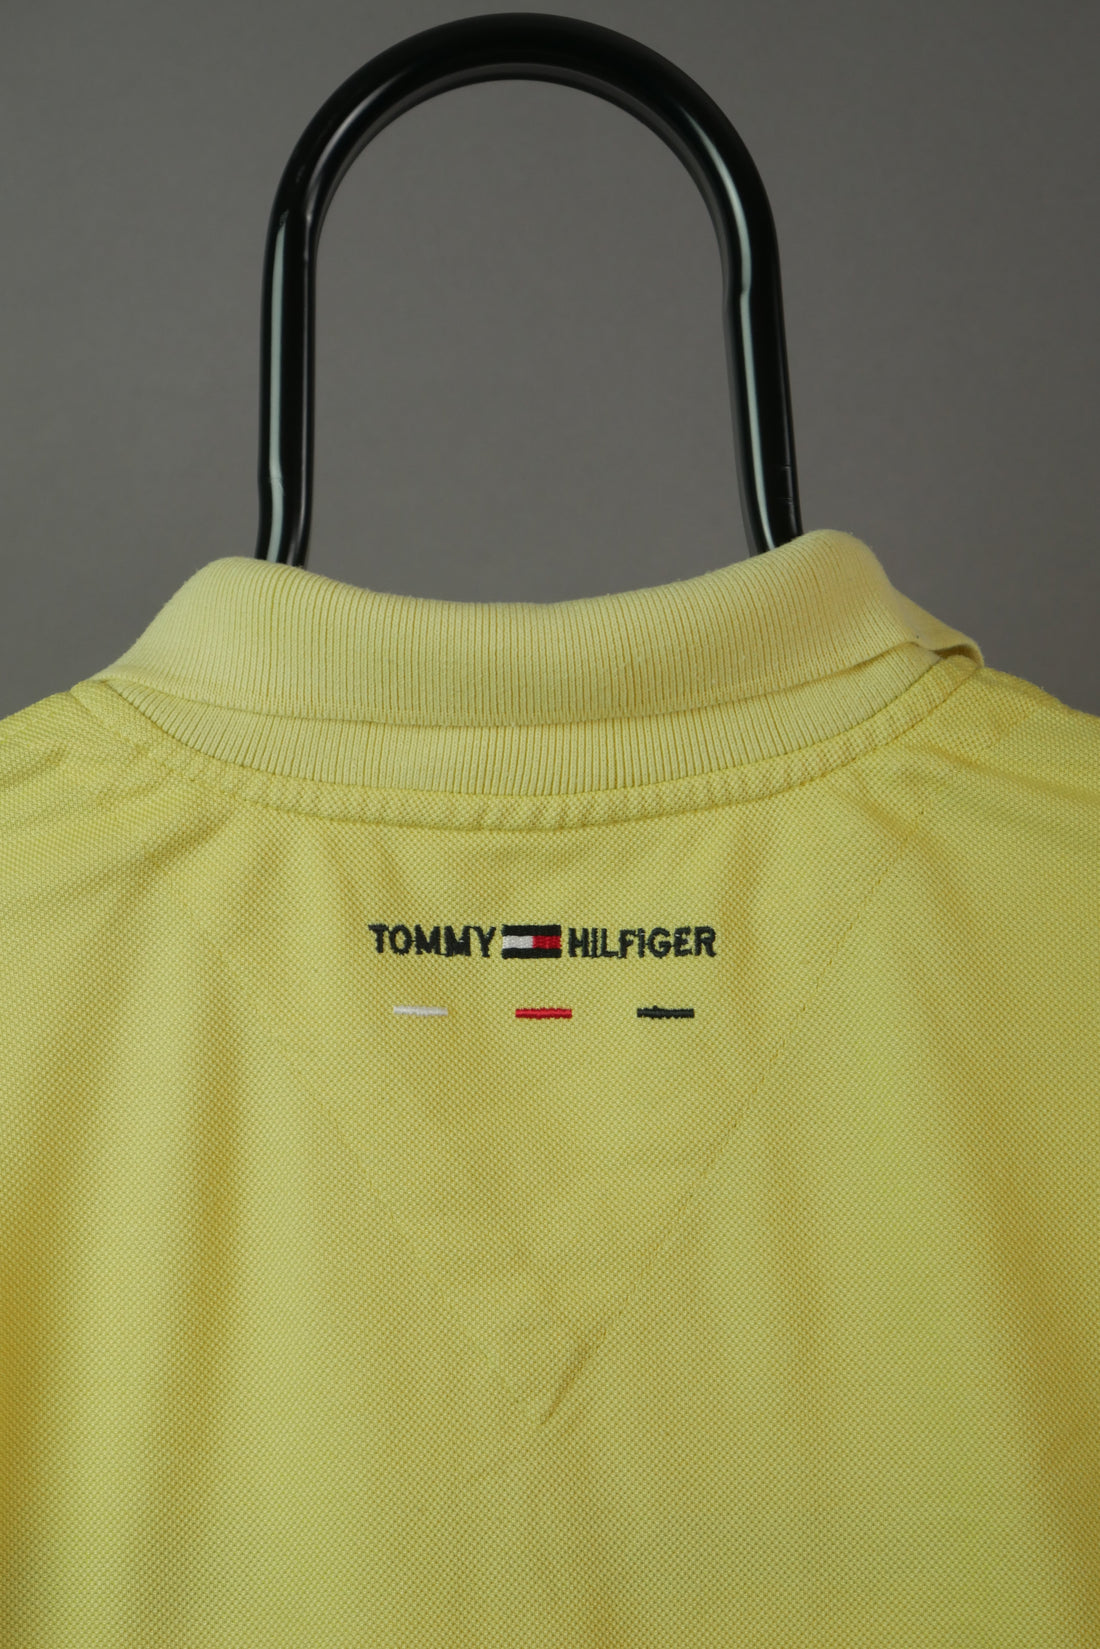 The Tommy Hilfiger Polo (XL)